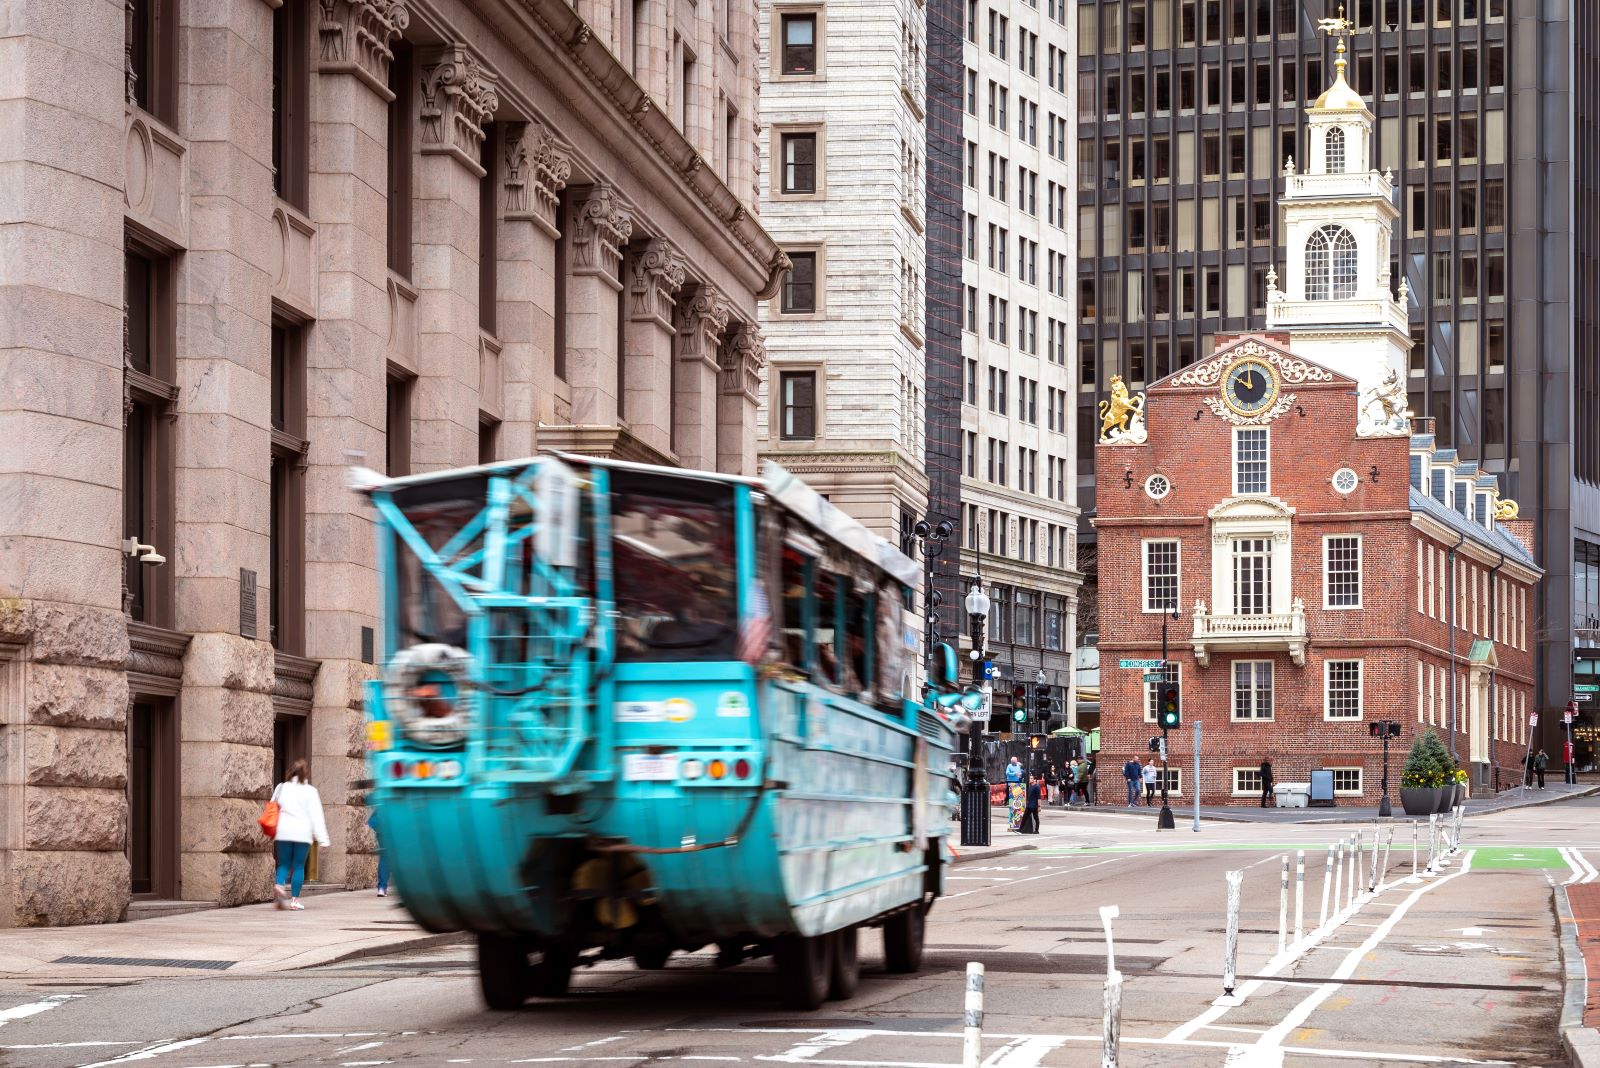 <p class="wp-caption-text">Image Credit: Shutterstock / Marcio Jose Bastos Silva</p>  <p>Stand at the site of the Boston Massacre, where tensions between America and Britain boiled over in 1770. It’s a somber reminder of the struggles for American independence.</p>